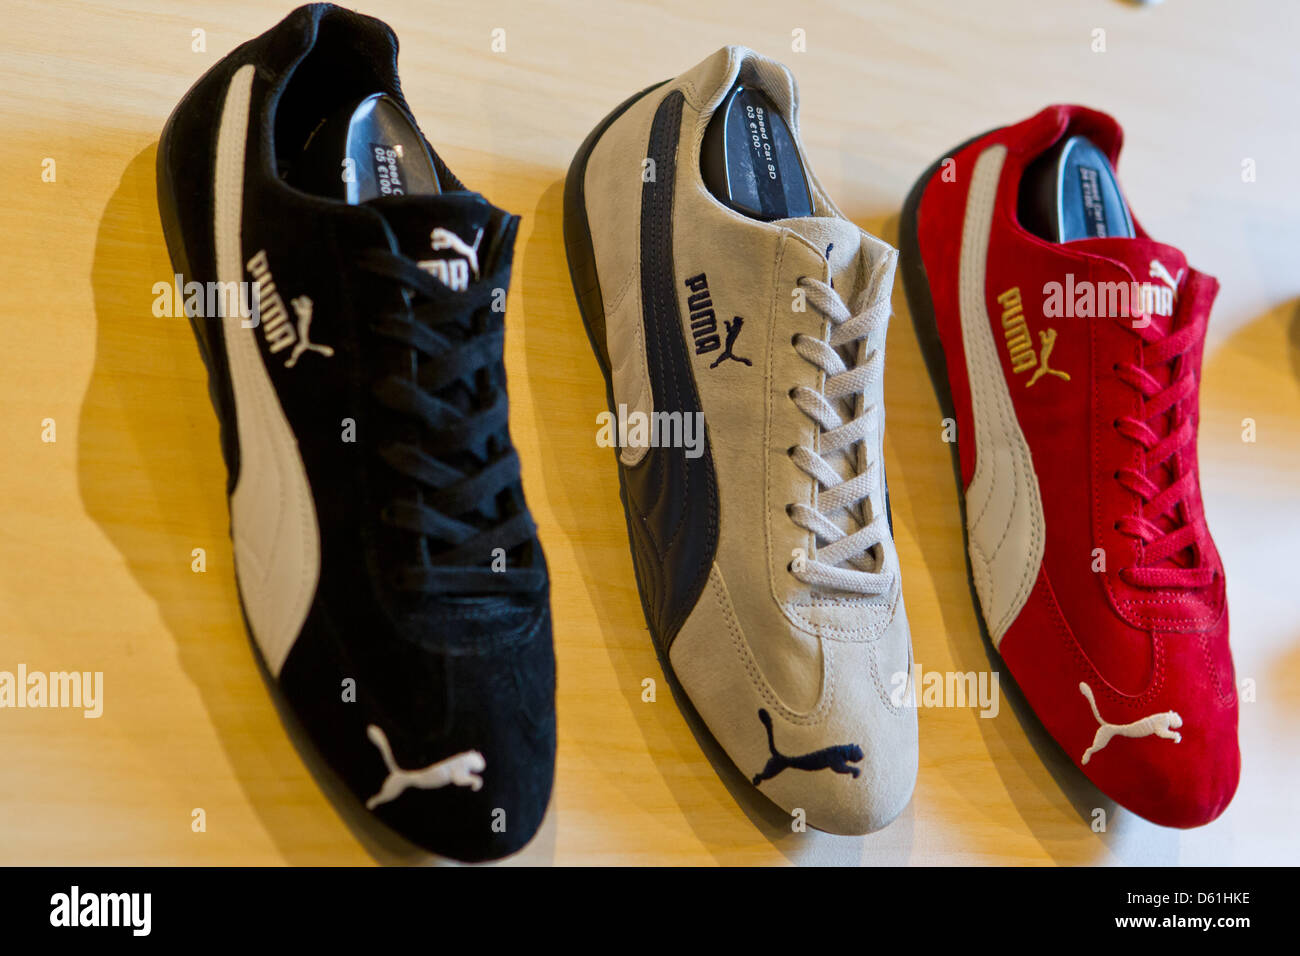 Shoes of the sportswear manufacturer Puma are displayed in a store in  Herzogenaurach, Germany, 24 April 2012. In 2011, Puma reached the three  billion euro turnover mark for the first time. The